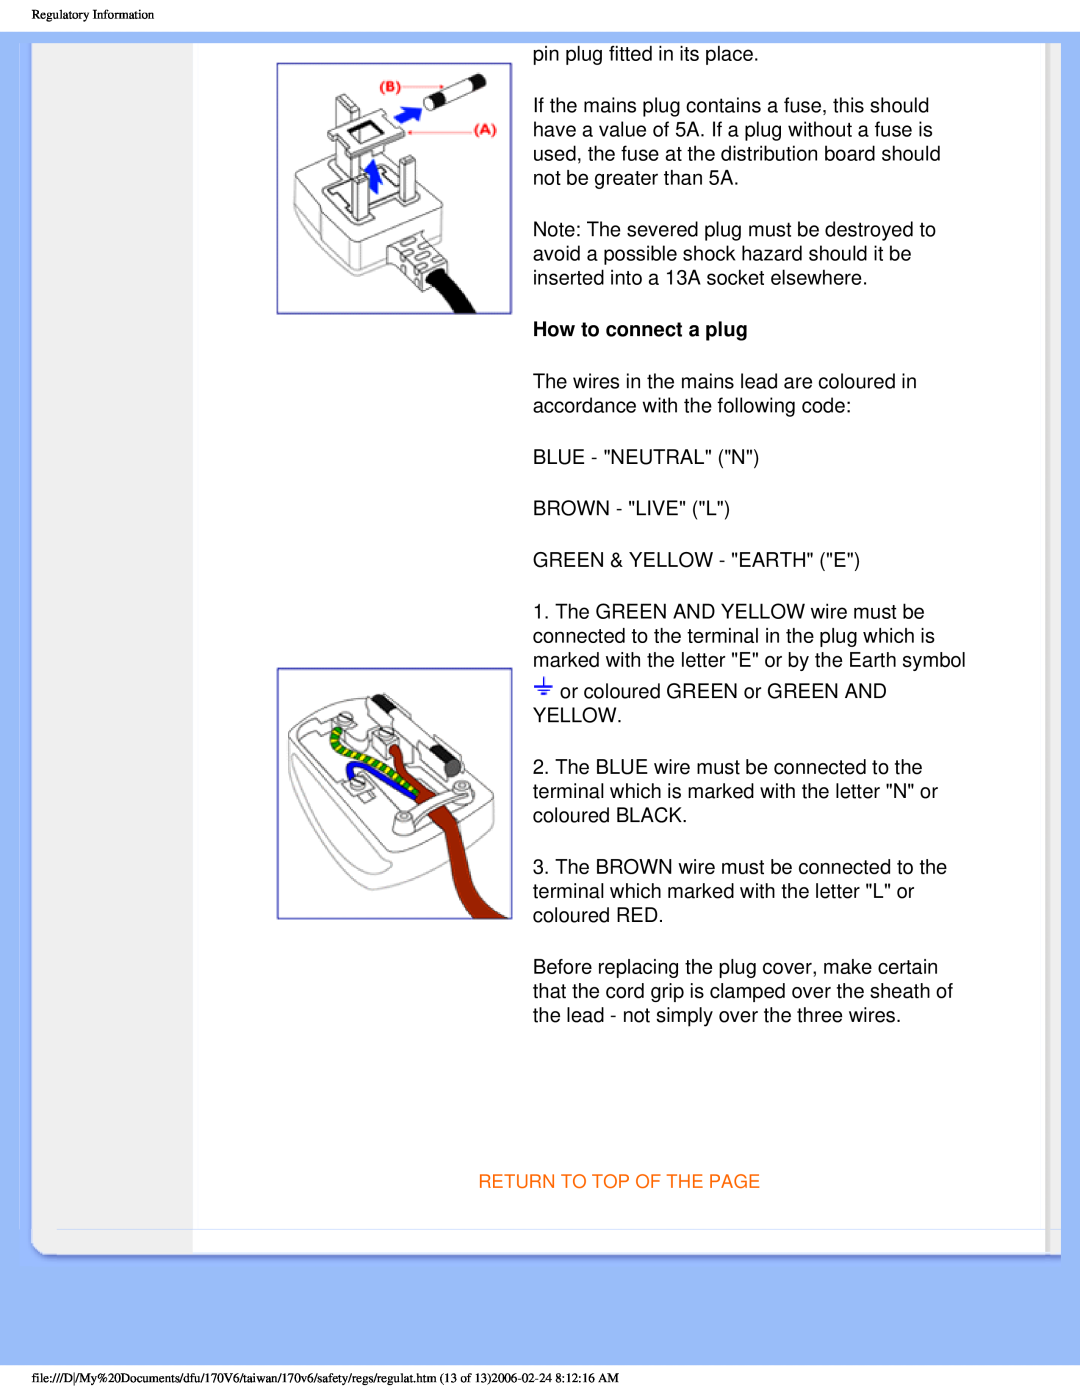 Philips 170V6 user manual How to connect a plug 